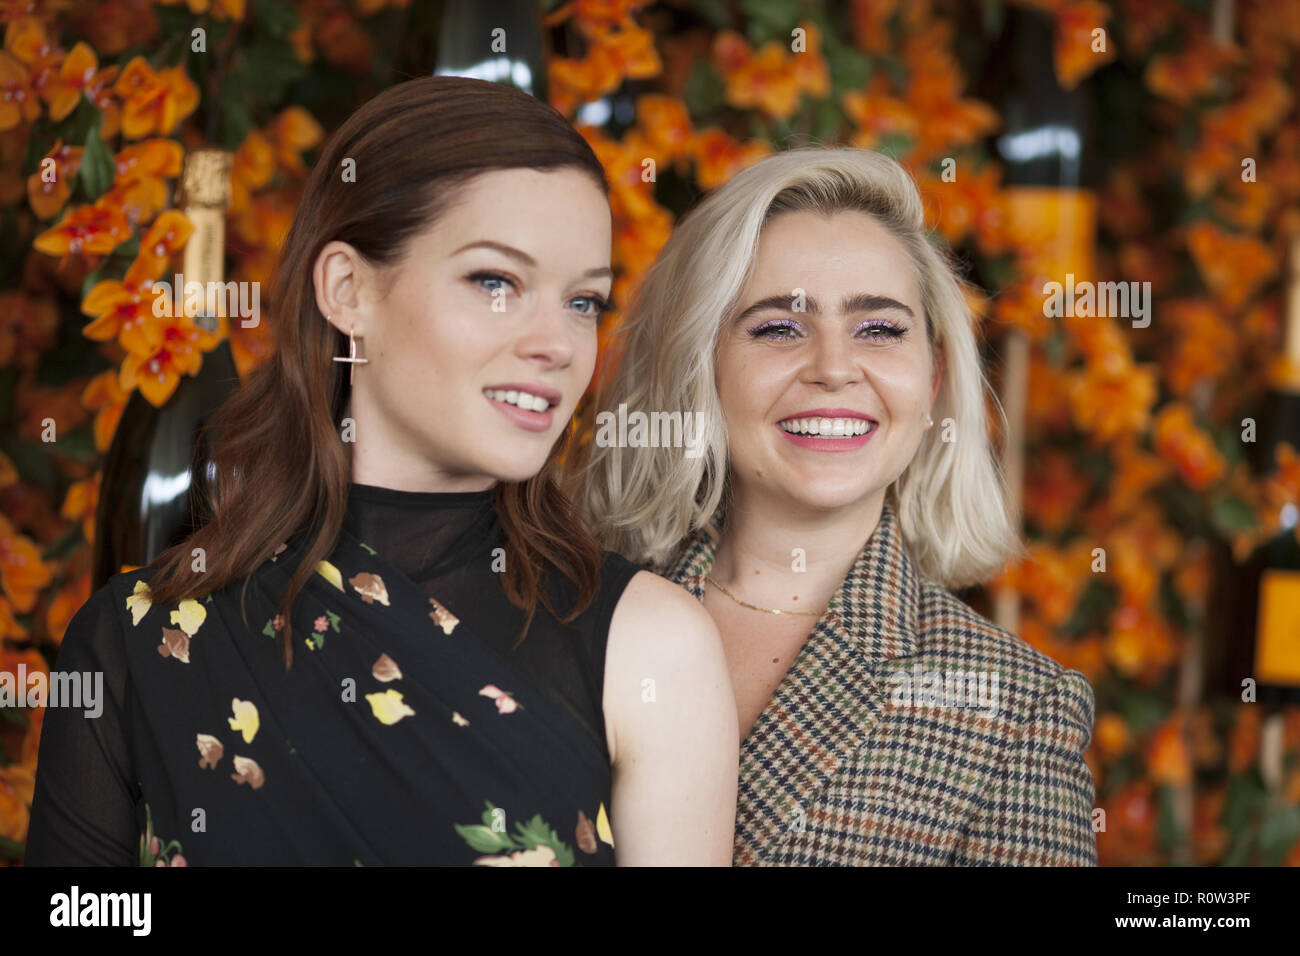 Annual Veuve Clicquot Polo Classic, held at Will Rogers State Historic Park in Los Angeles, California. Jane Levy, Mae Whitman Where: Los Angeles, California, United States When: 06 2018